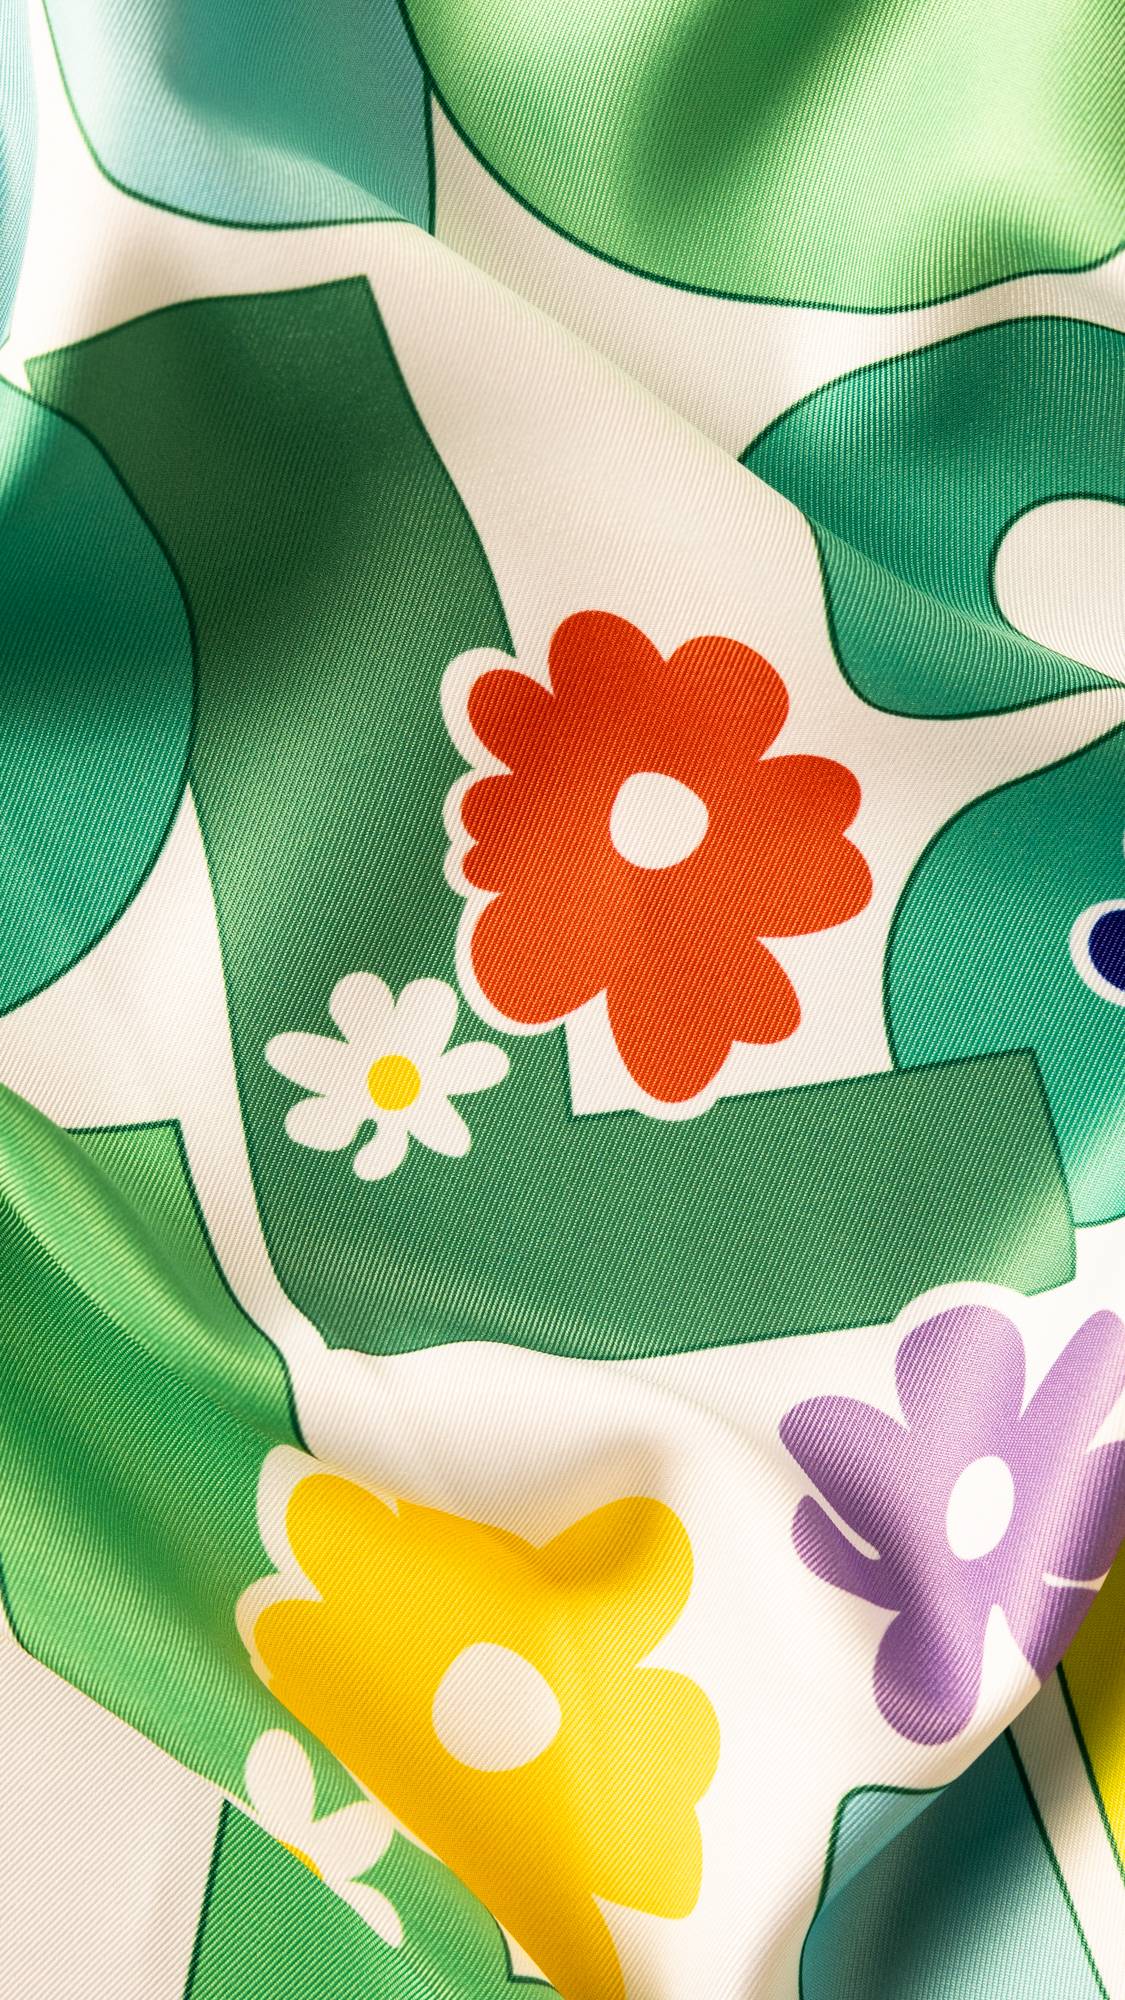 Image shows a super close-up of the knot wrap, focusing on the green lettering with orange, yellow and purple flowers.